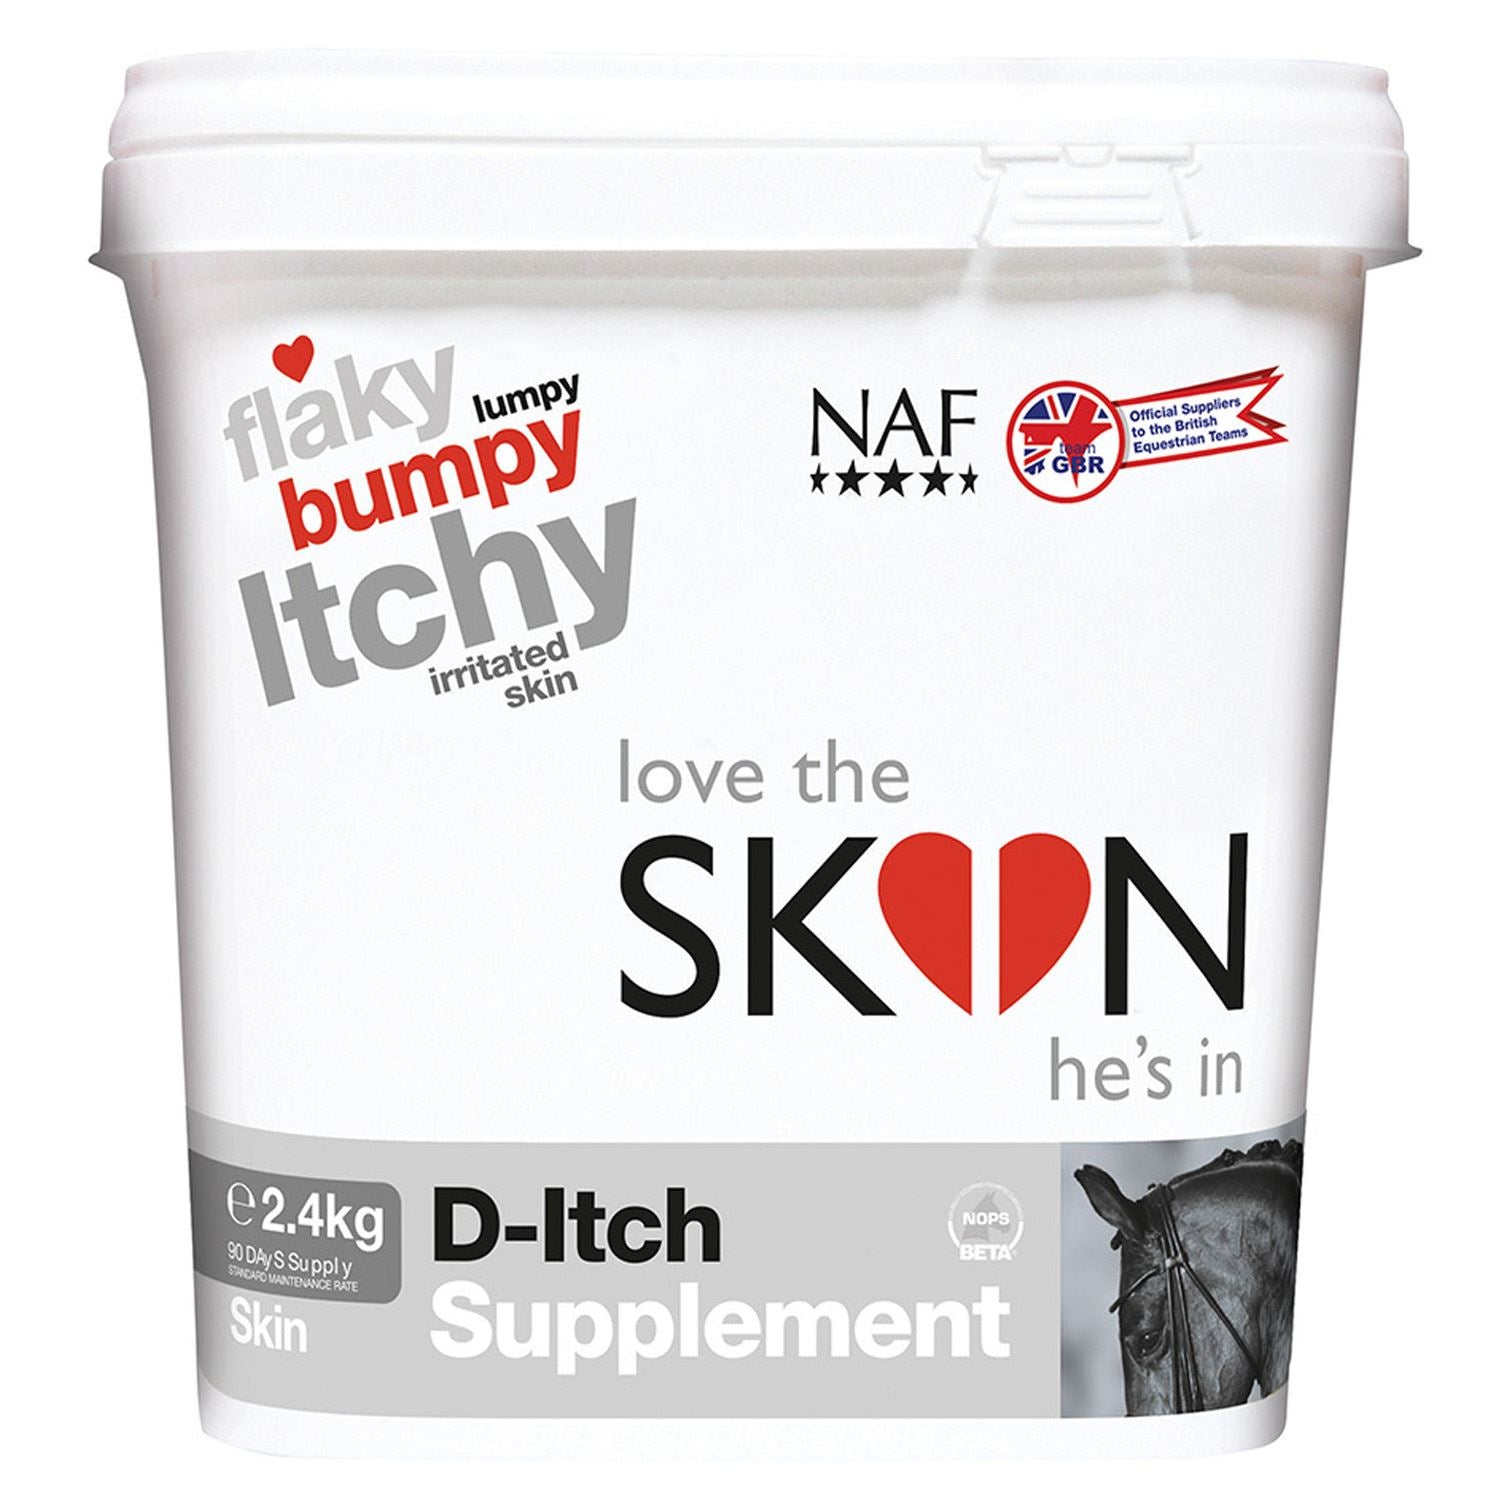 Naf Love The Skin Hes In D-Itch Supplement - Just Horse Riders